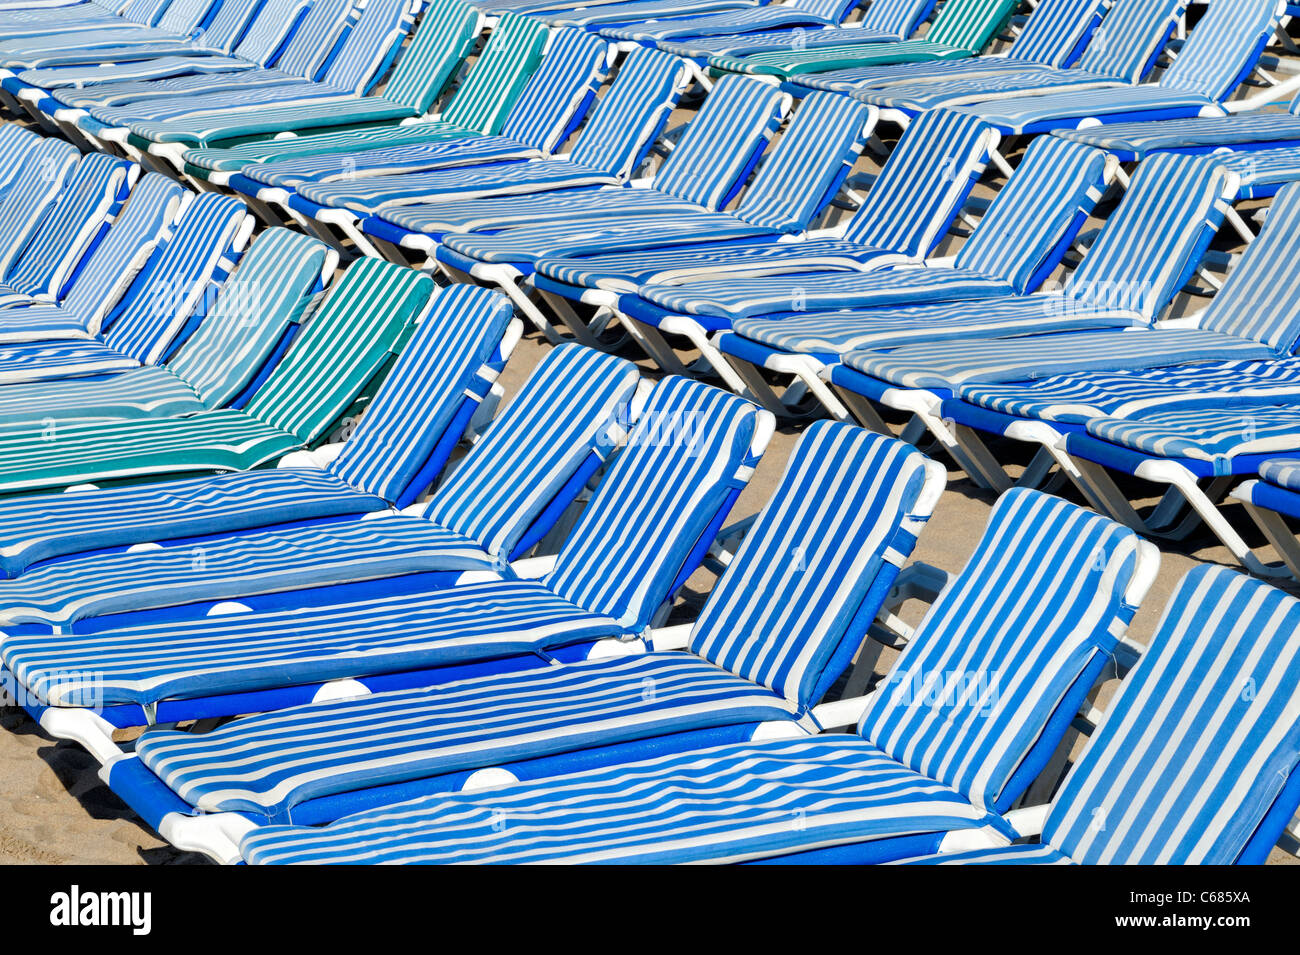 Blue and white striped padded sunbeds packed together on a beach Stock Photo